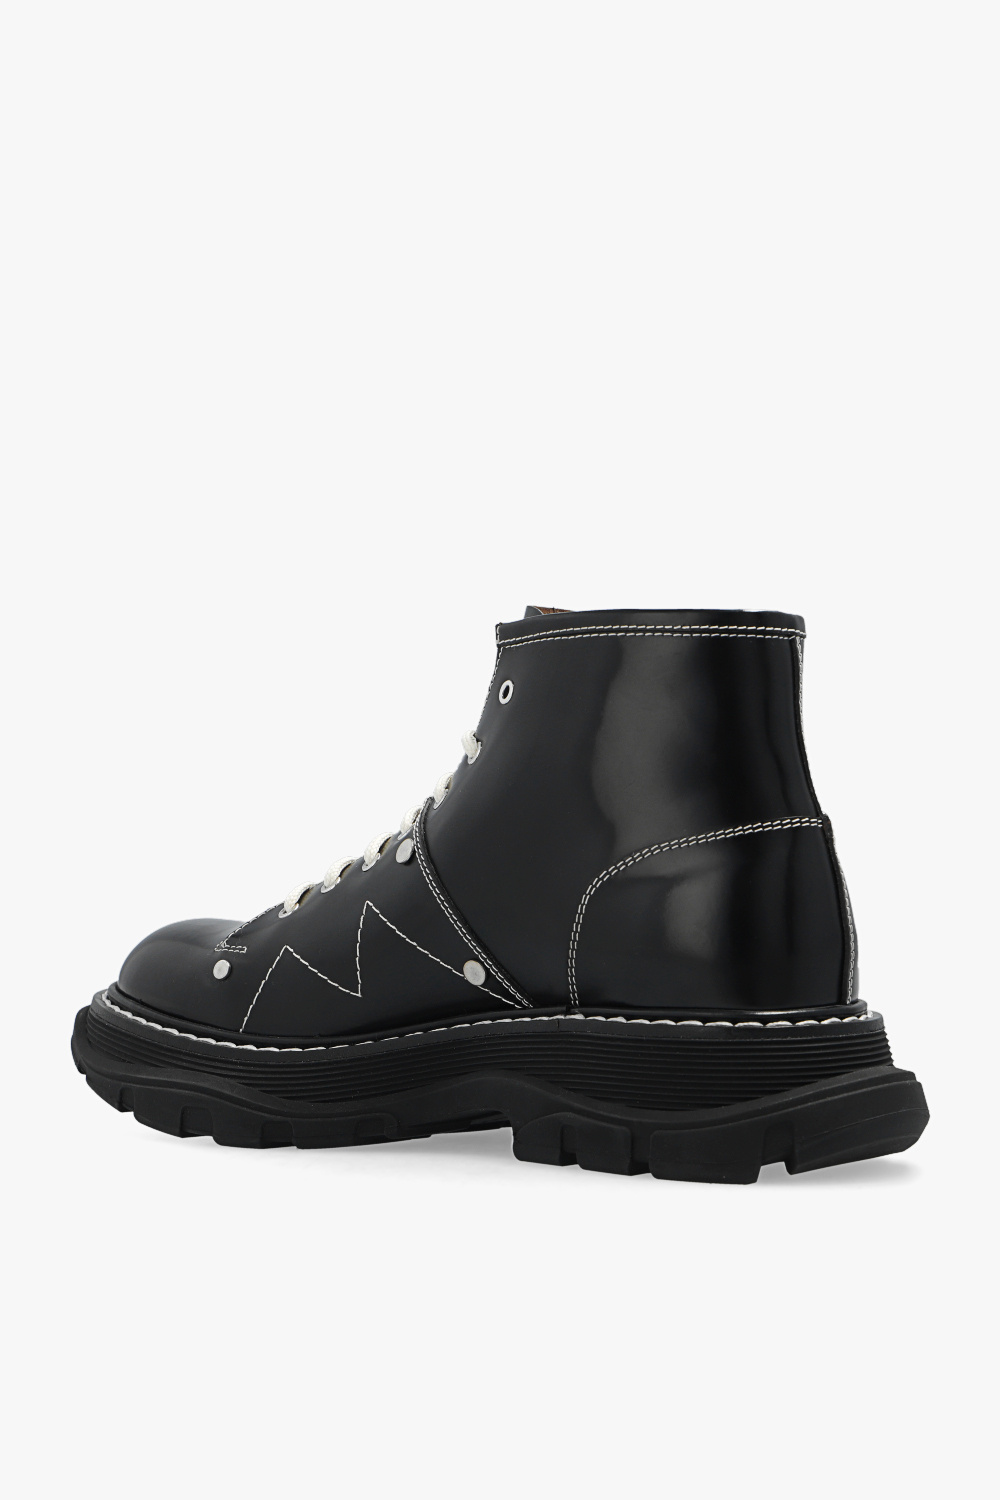 Alexander McQueen Leather Szary shoes